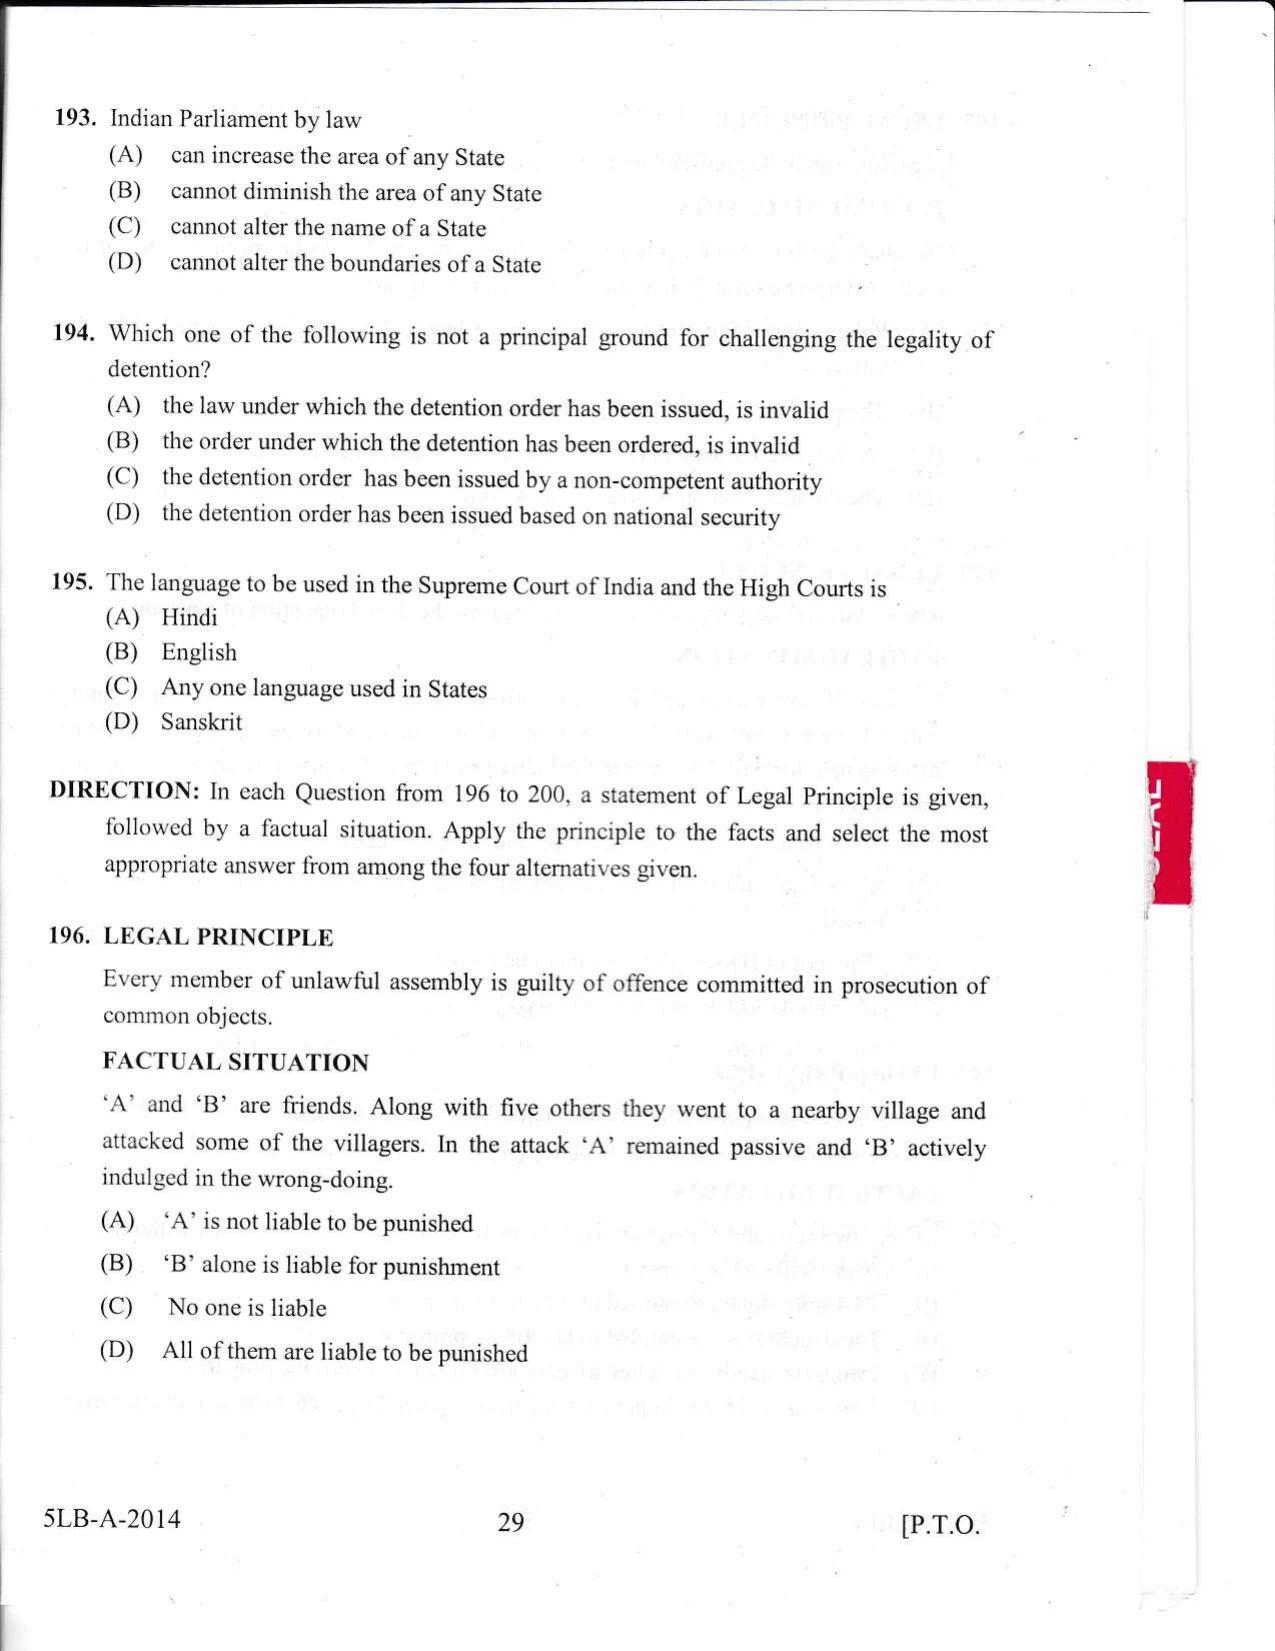 KLEE 5 Year LLB Exam 2014 Question Paper - Page 29